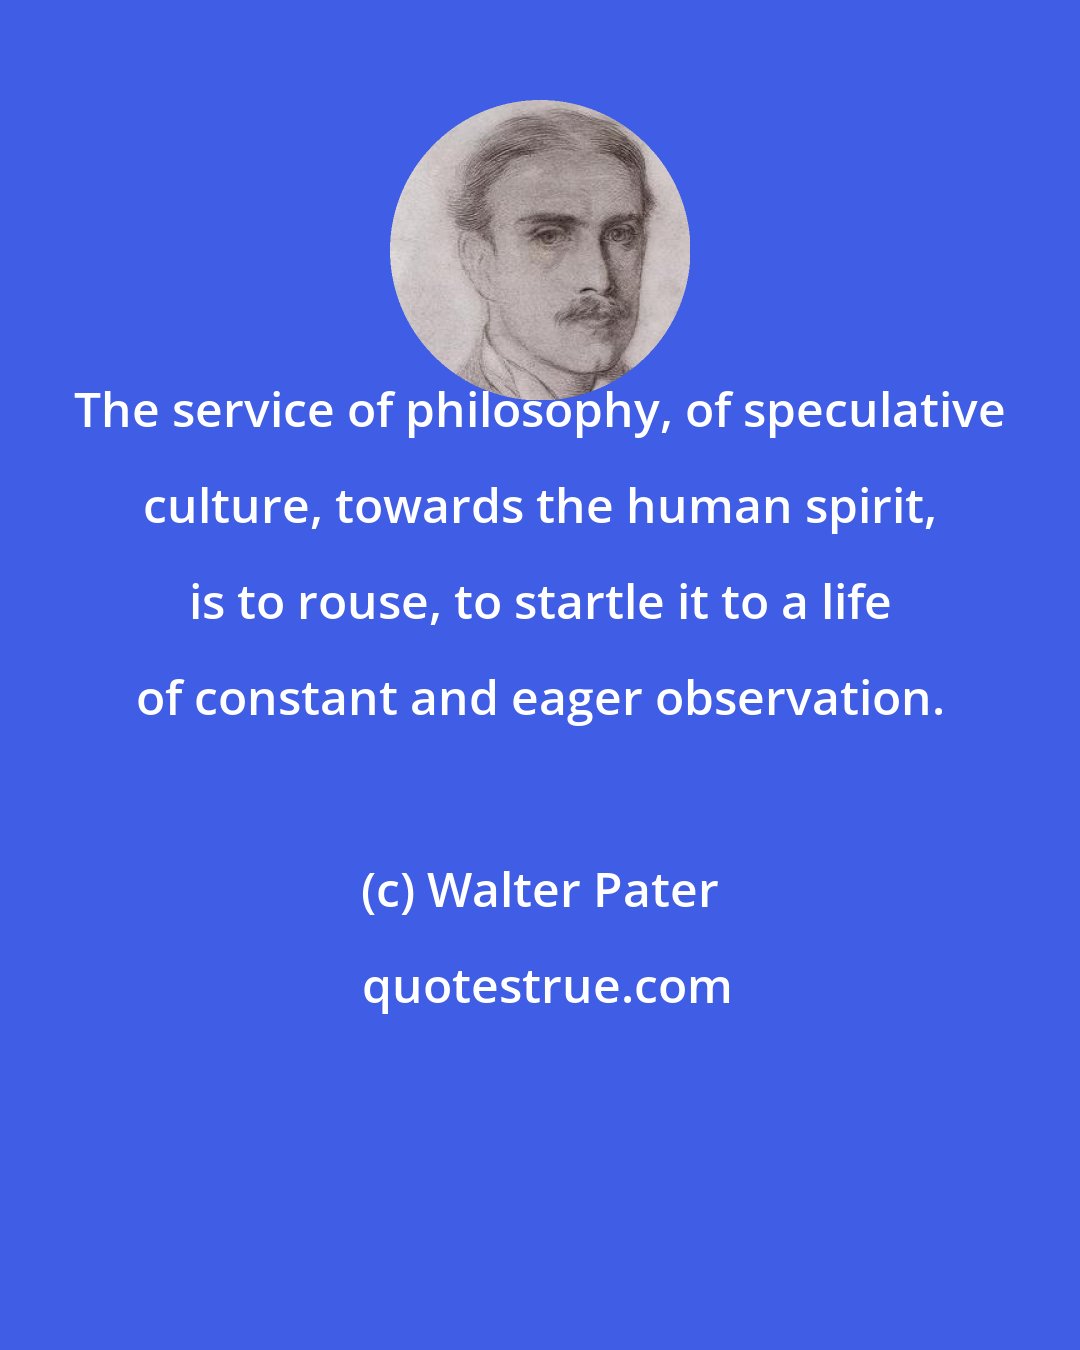 Walter Pater: The service of philosophy, of speculative culture, towards the human spirit, is to rouse, to startle it to a life of constant and eager observation.